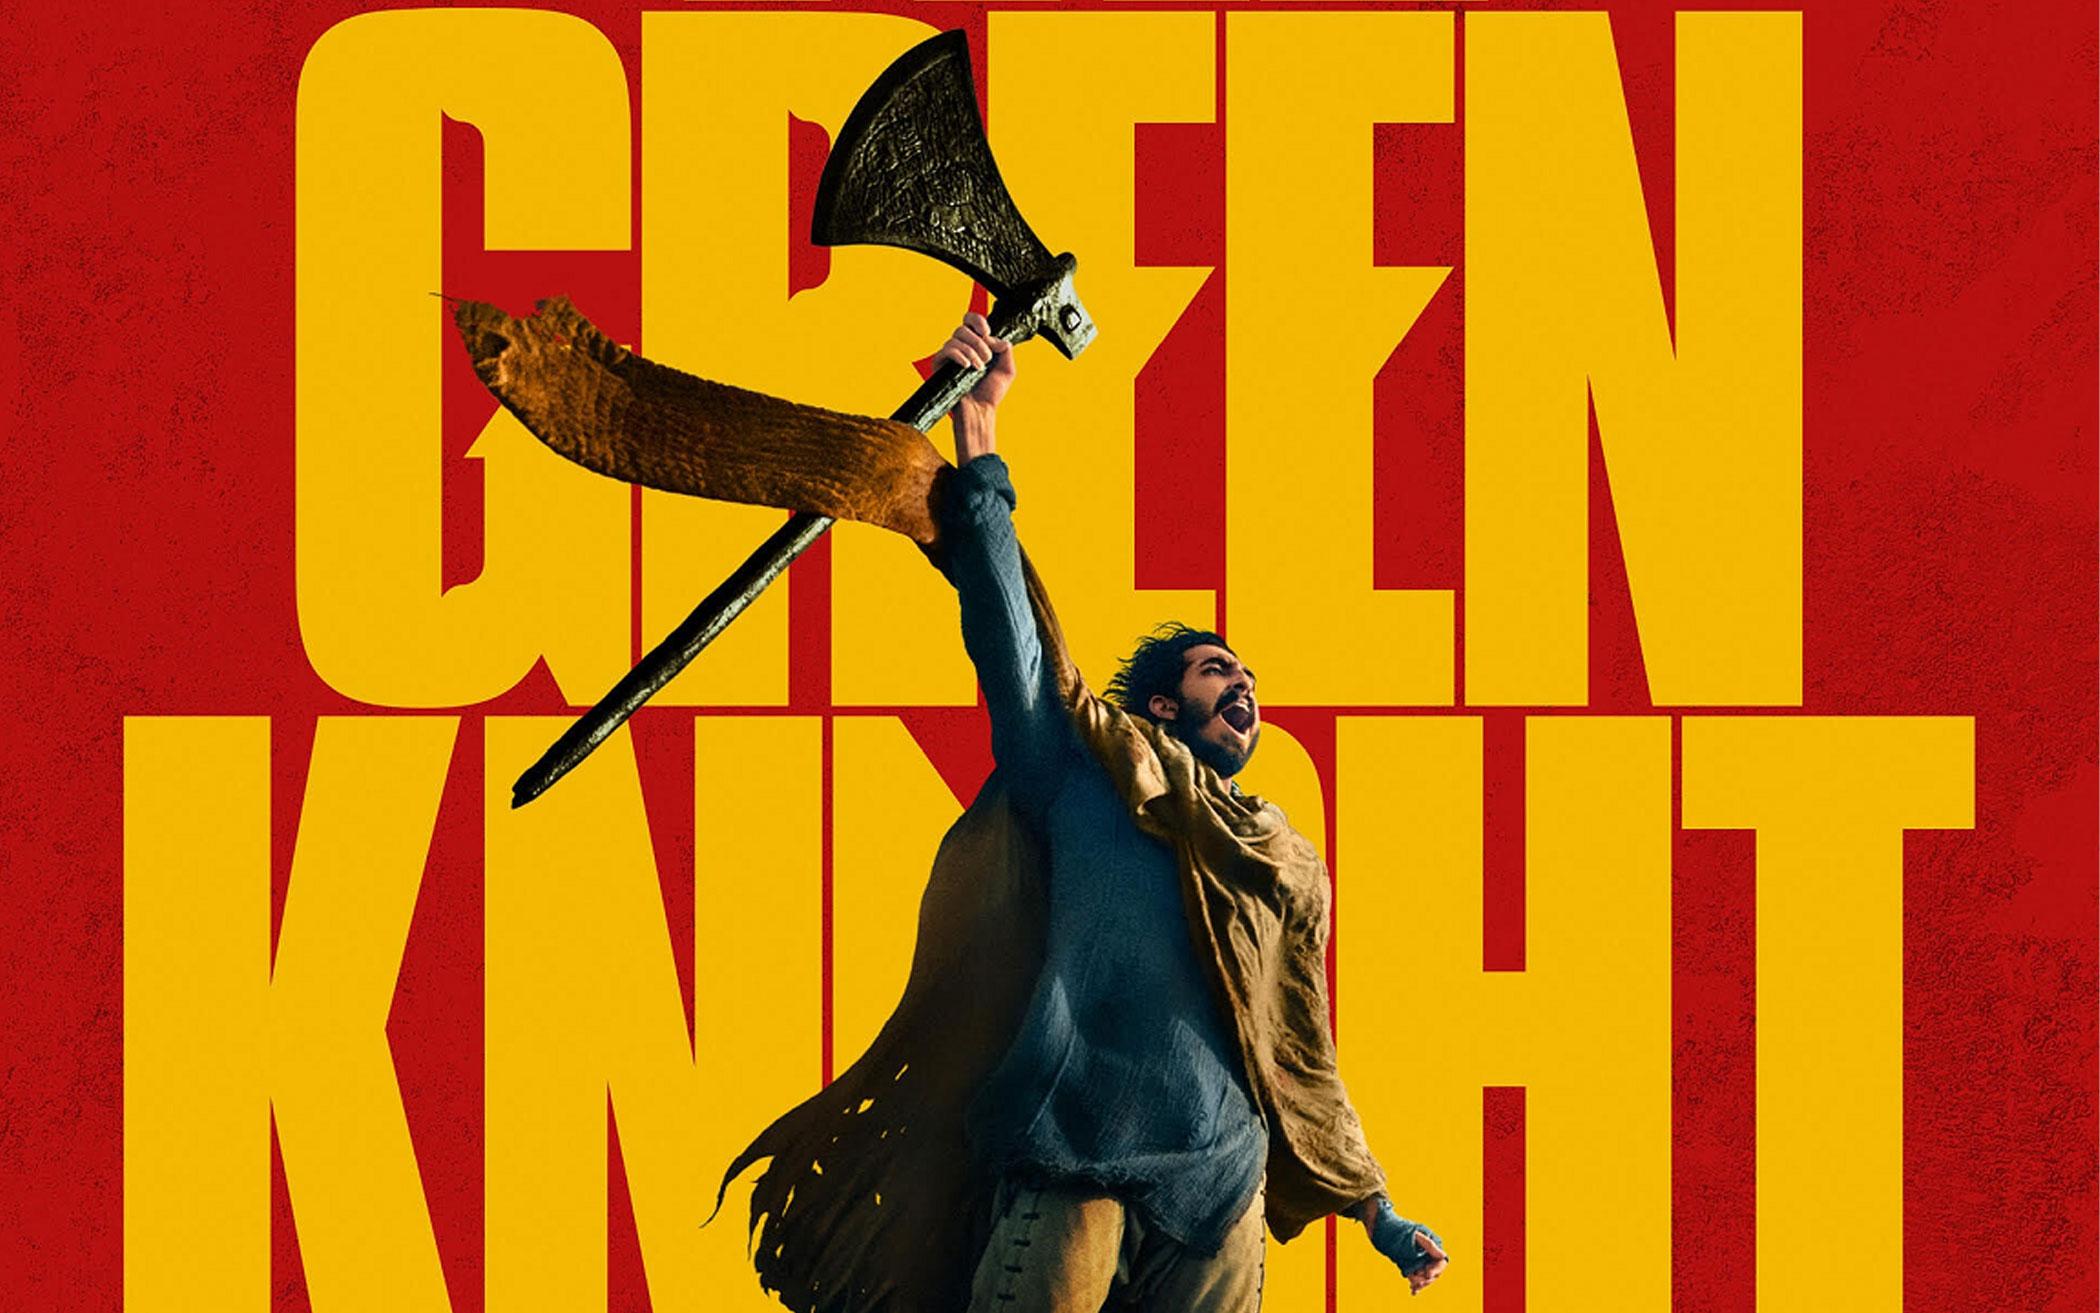 The Green Knight movie review: A24's adaptation is the ultimate Arthurian  trip.